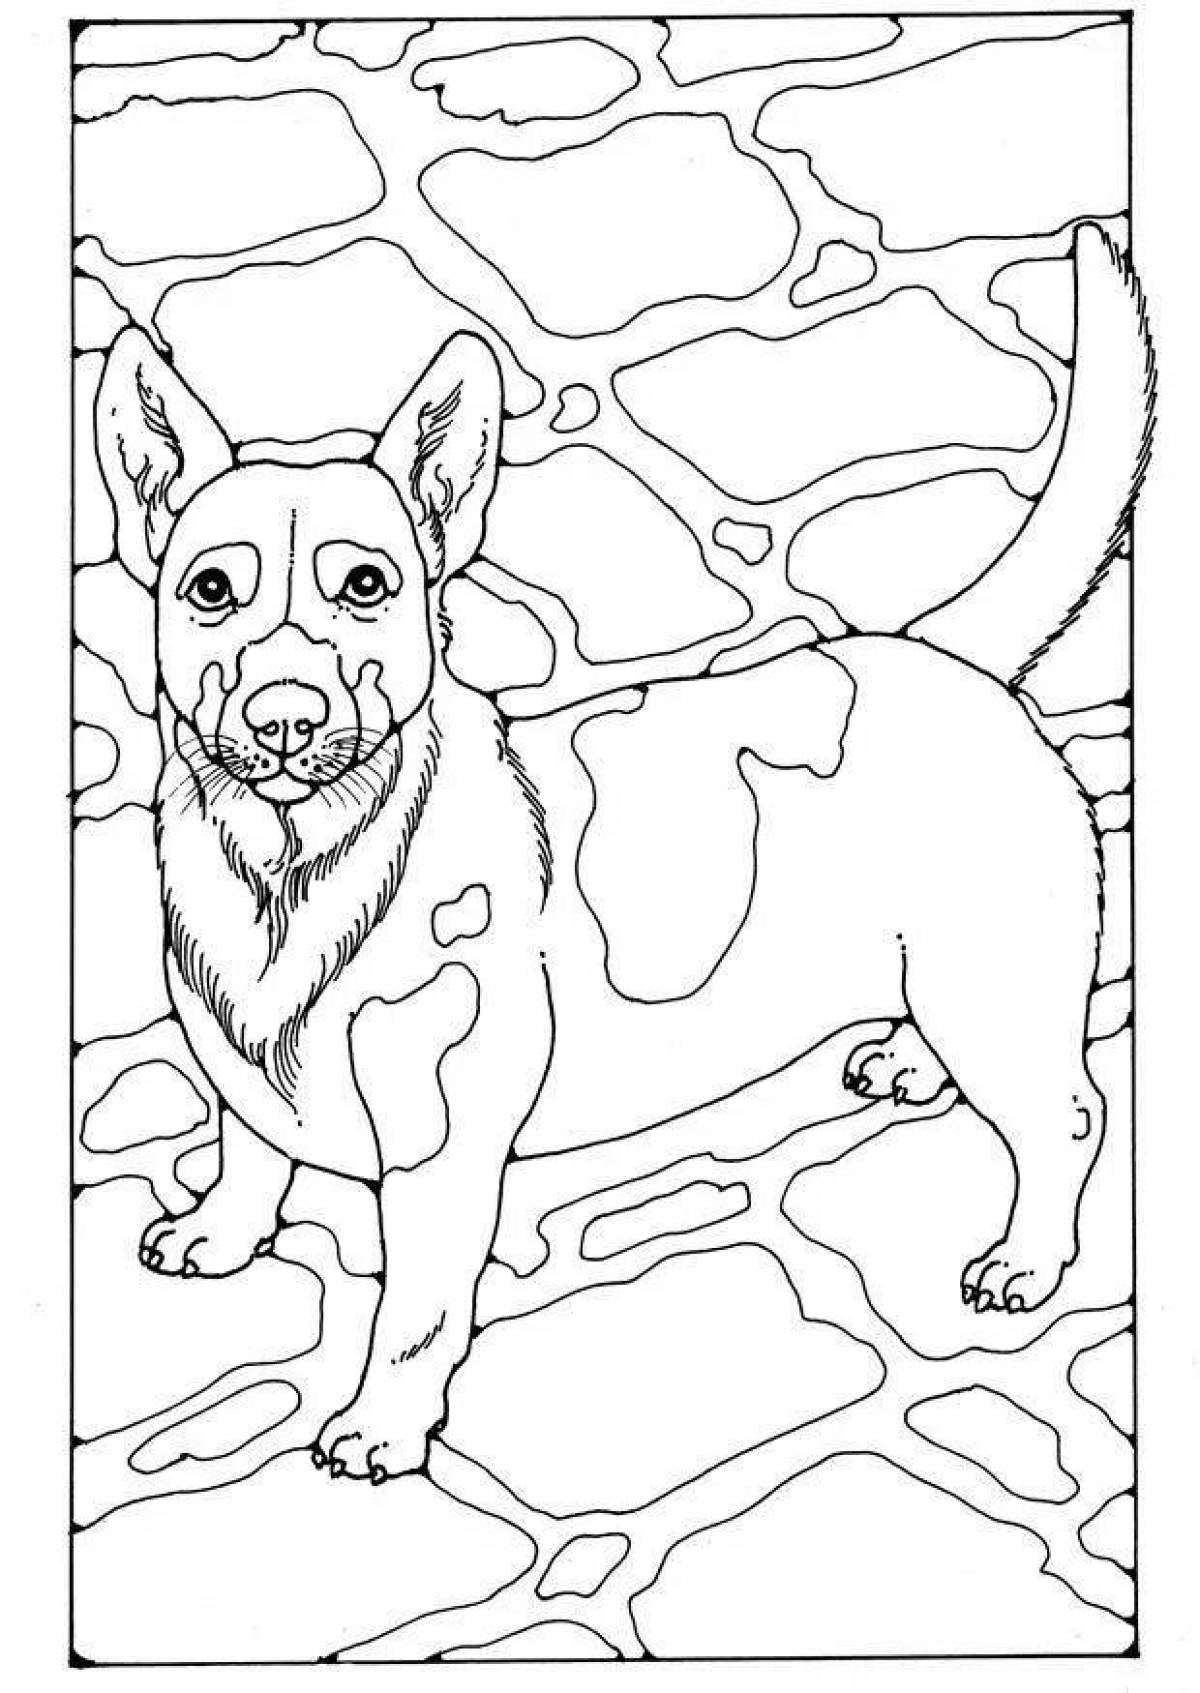 Funny jack russell terrier coloring book